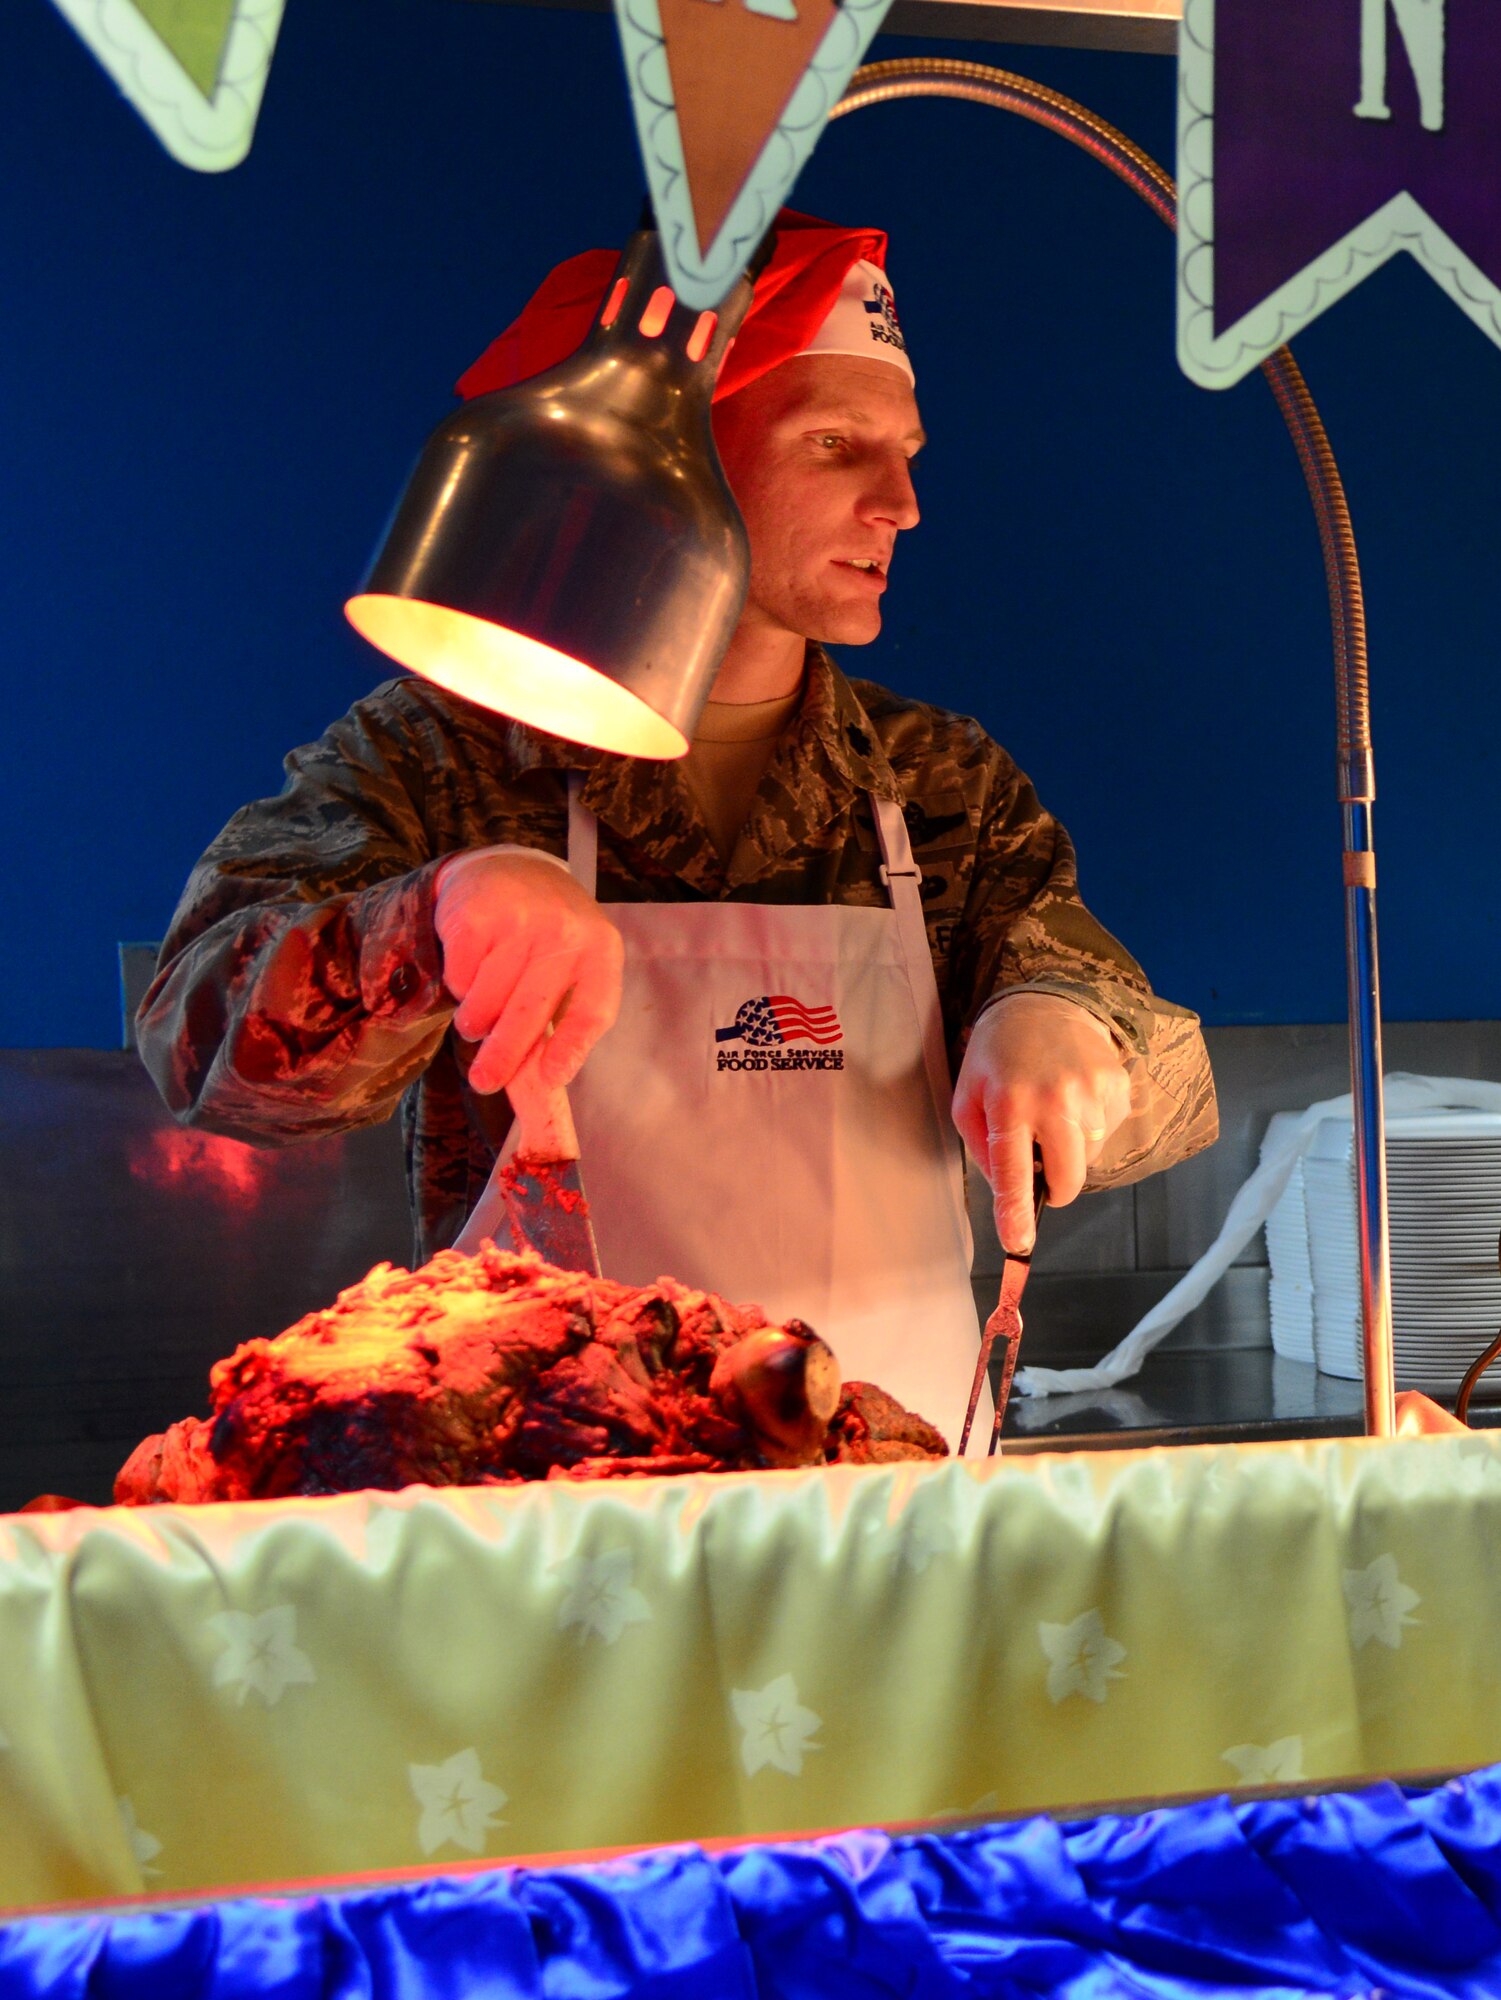 U.S. Air Force Lt. Col. Jesse Baker, 8th Expeditionary Air Mobility Squadron commander, carves up roast beef during the annual Thanksgiving meal, Nov. 27, 2014, at Al Udeid Air Base, Qatar. Senior leadership volunteered throughout the day to serve meals to servicemembers at the three base dining facilities. (U.S. Air Force photo by Senior Airman Kia Atkins)